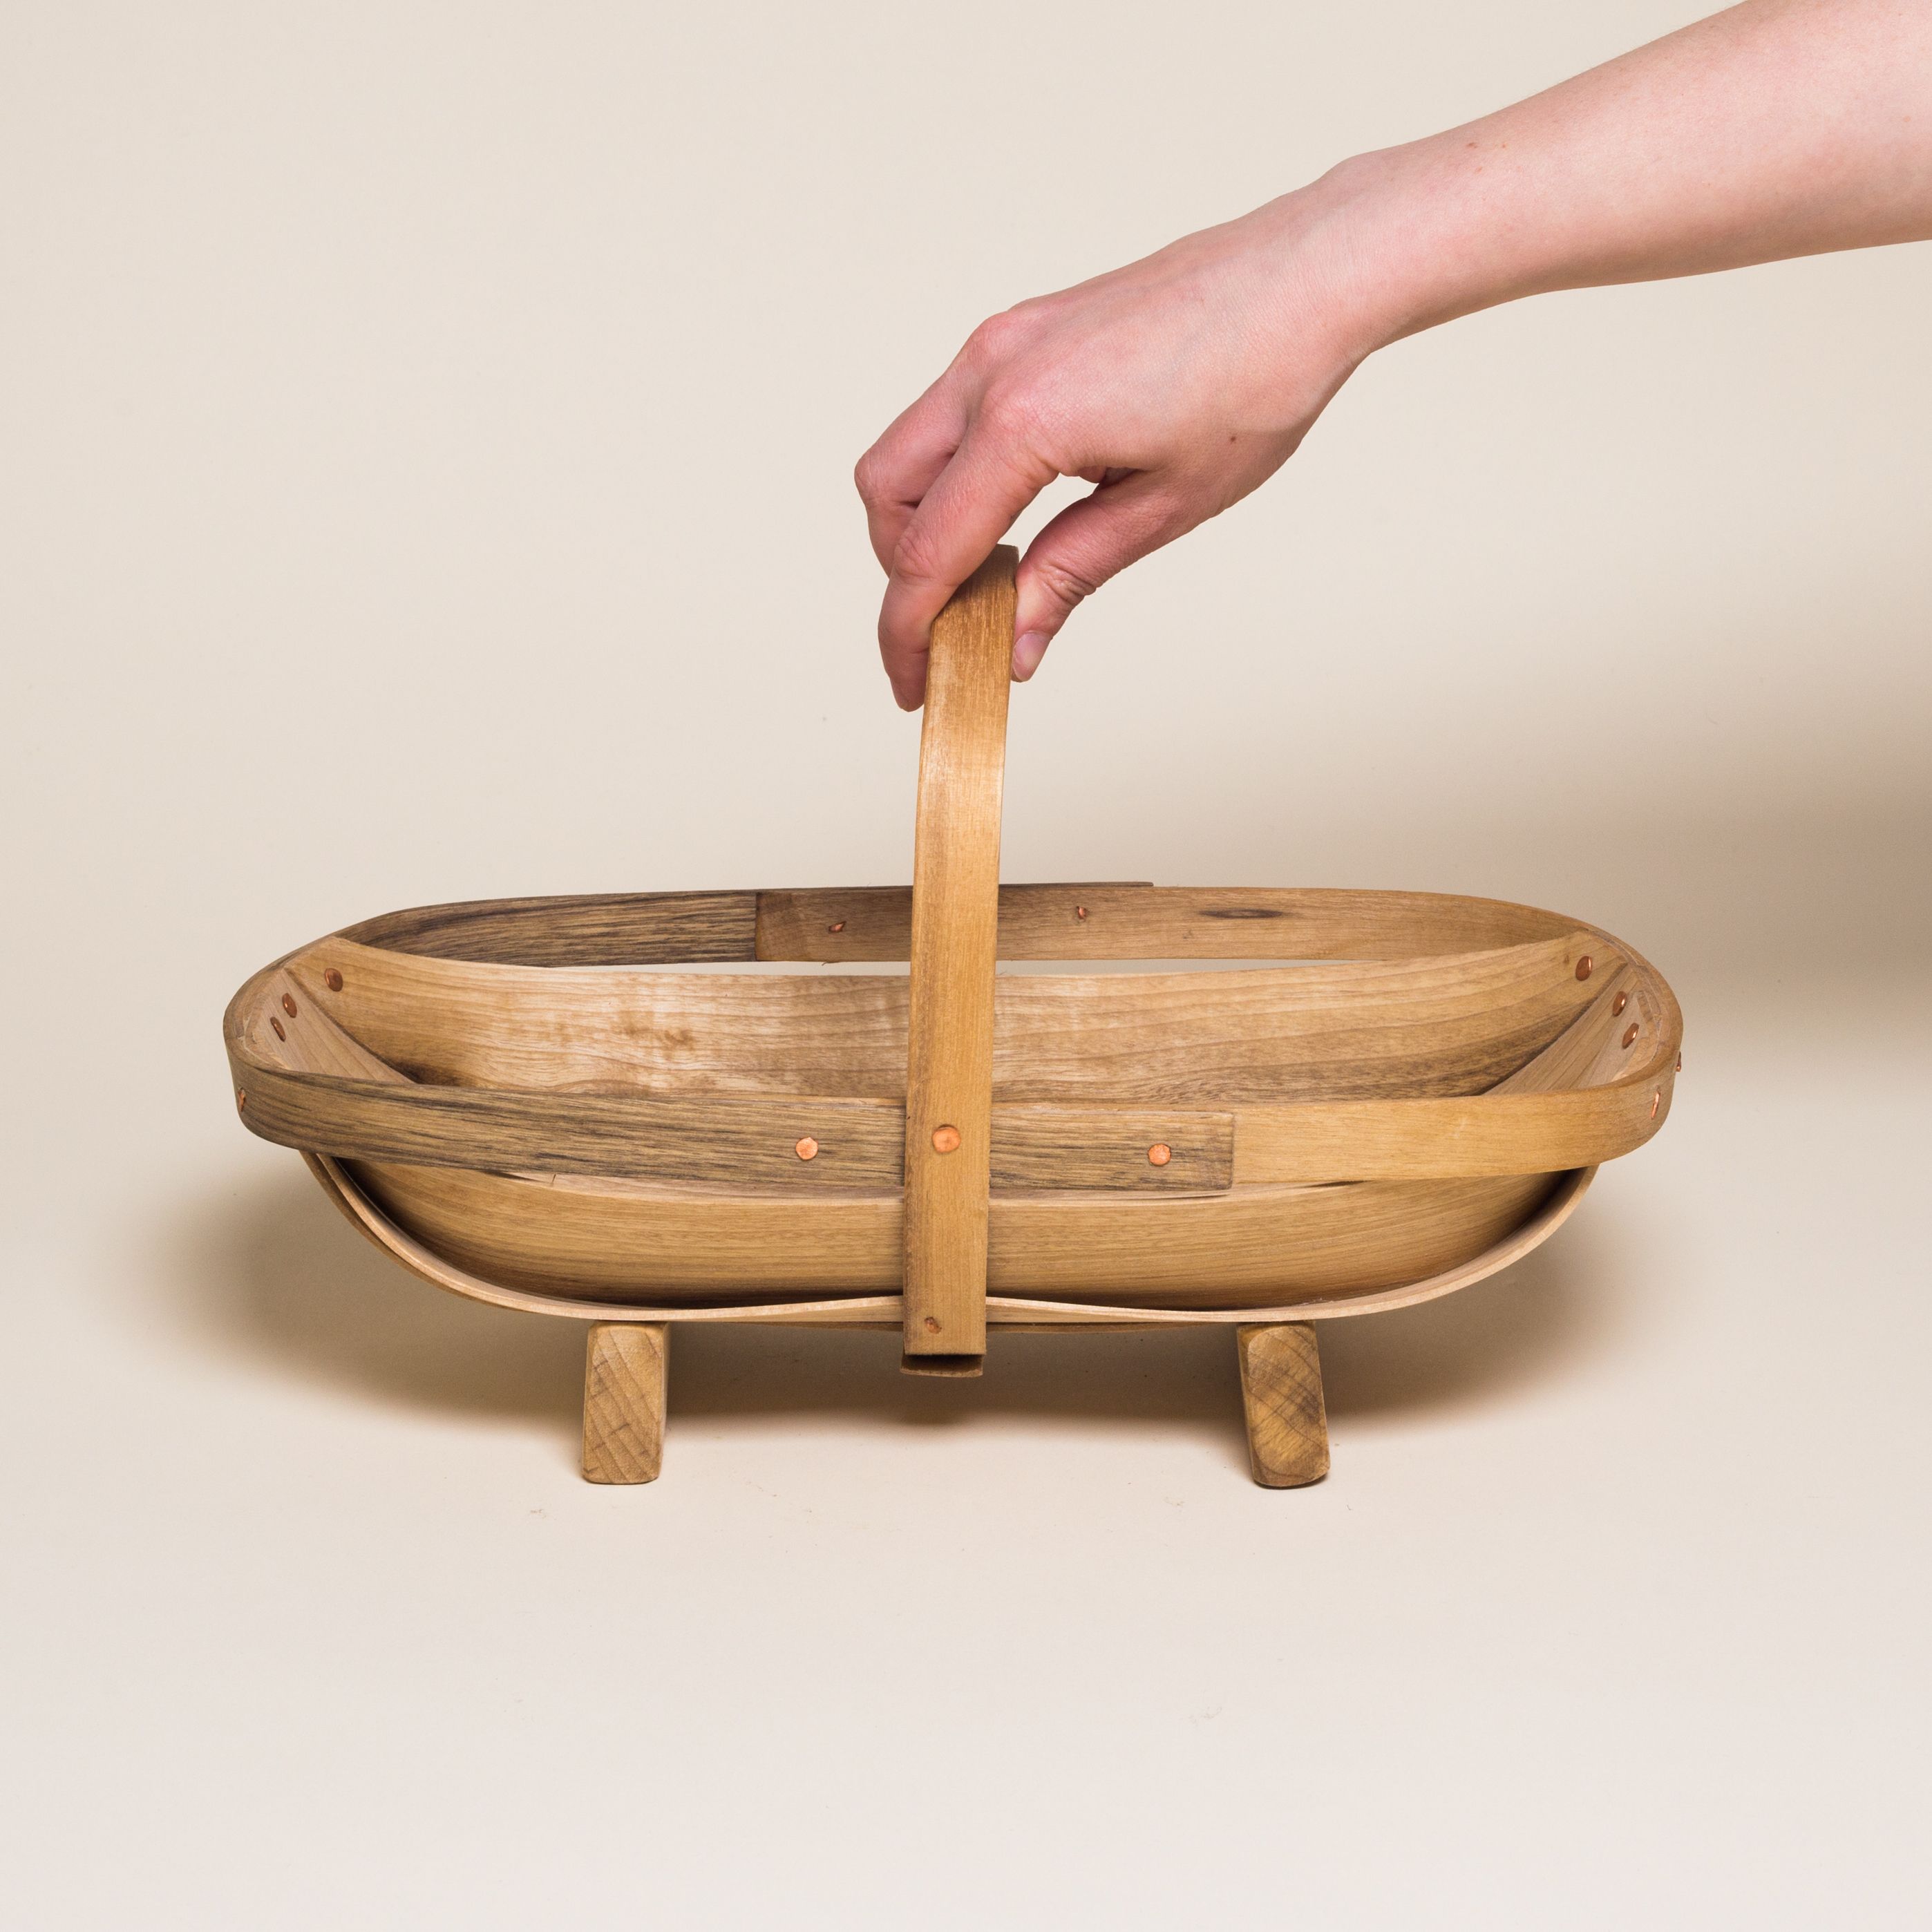 A wooden trug basket with two feet and a handle that encircles the center